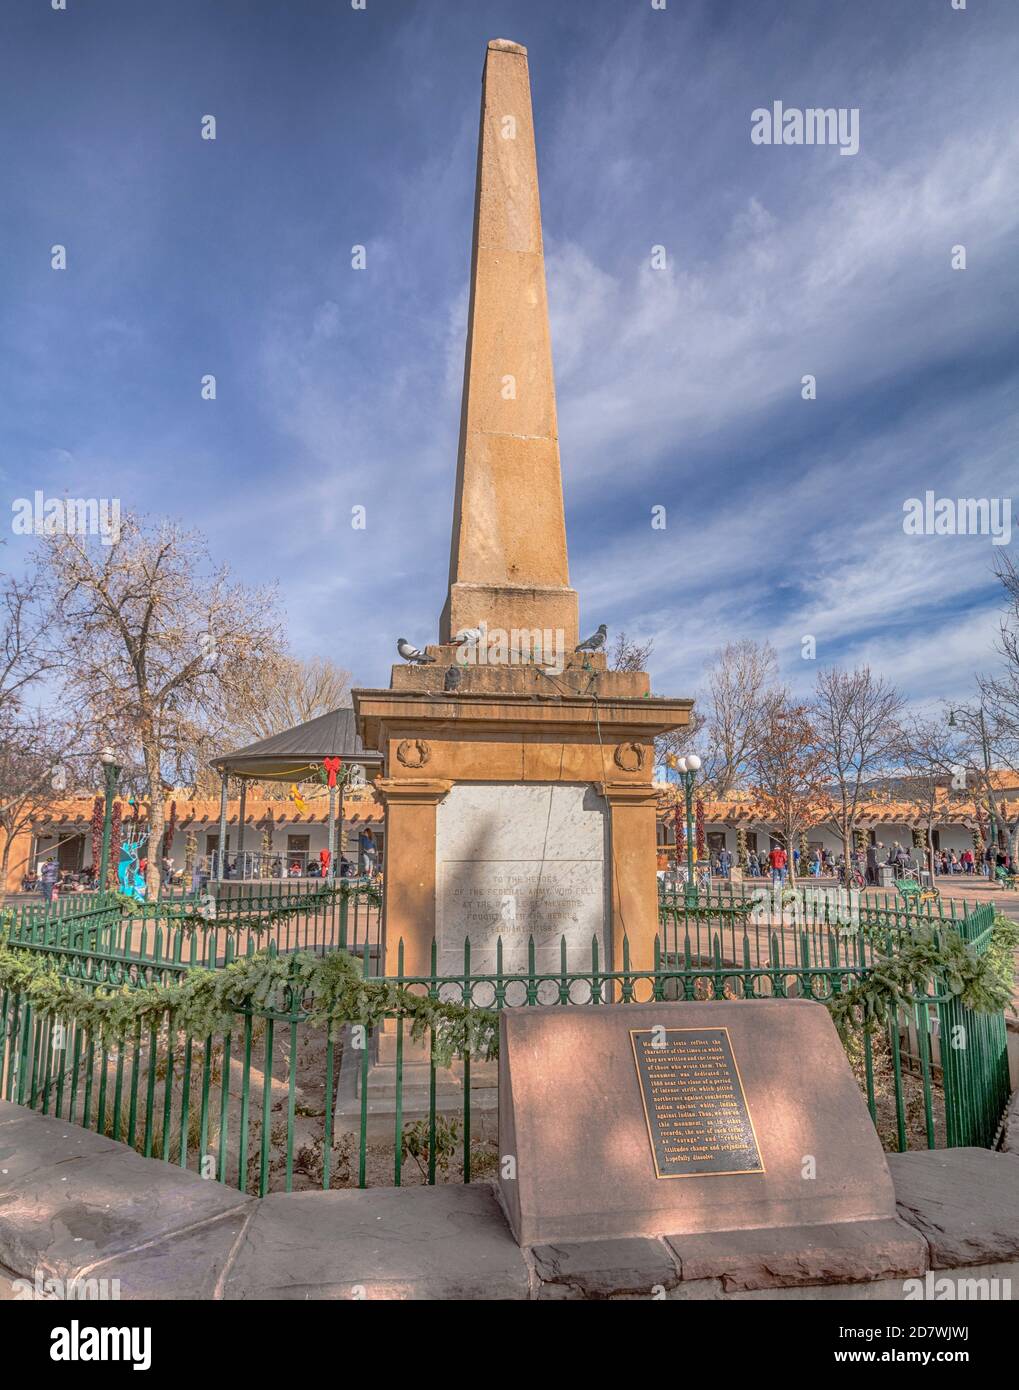 Santa Fe Plaza obelisk, the Soldiers' Monument honoring men who fought in the Indian Wars was torn down as a racist symbol in October 2020, NM, USA. Stock Photo